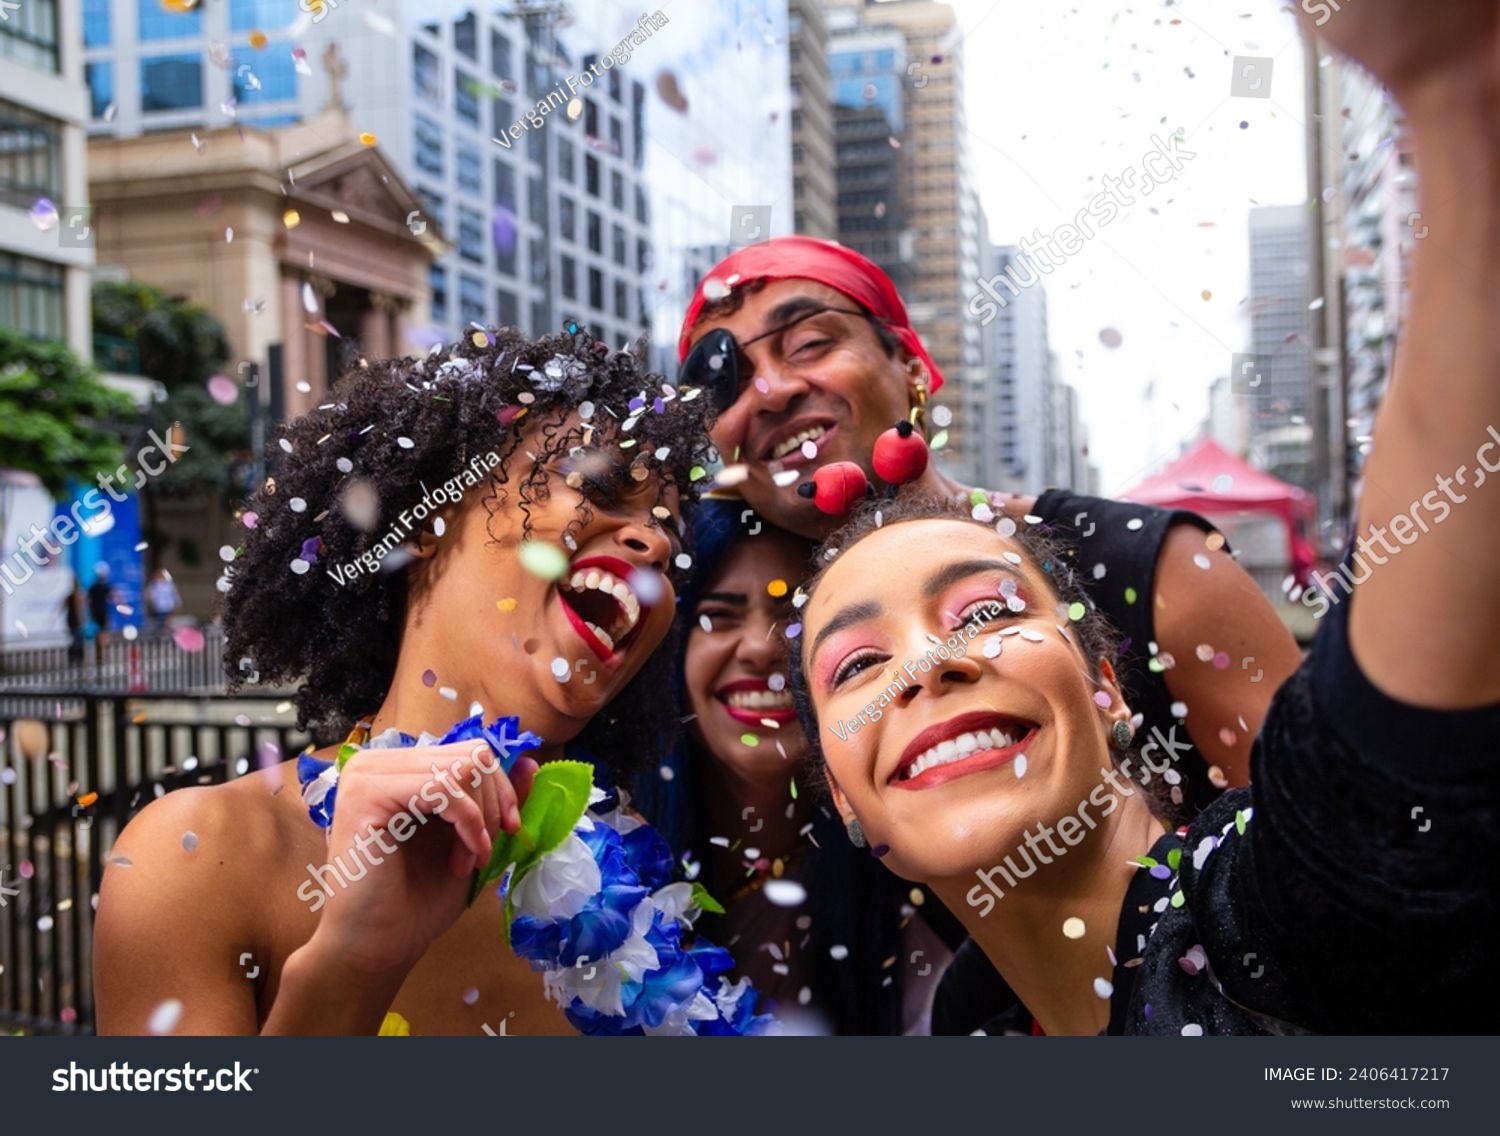 Girls taking selfie at street party parade, brazilian carnaval. Group of Brazilian friends in costume celebrating. #2406417217